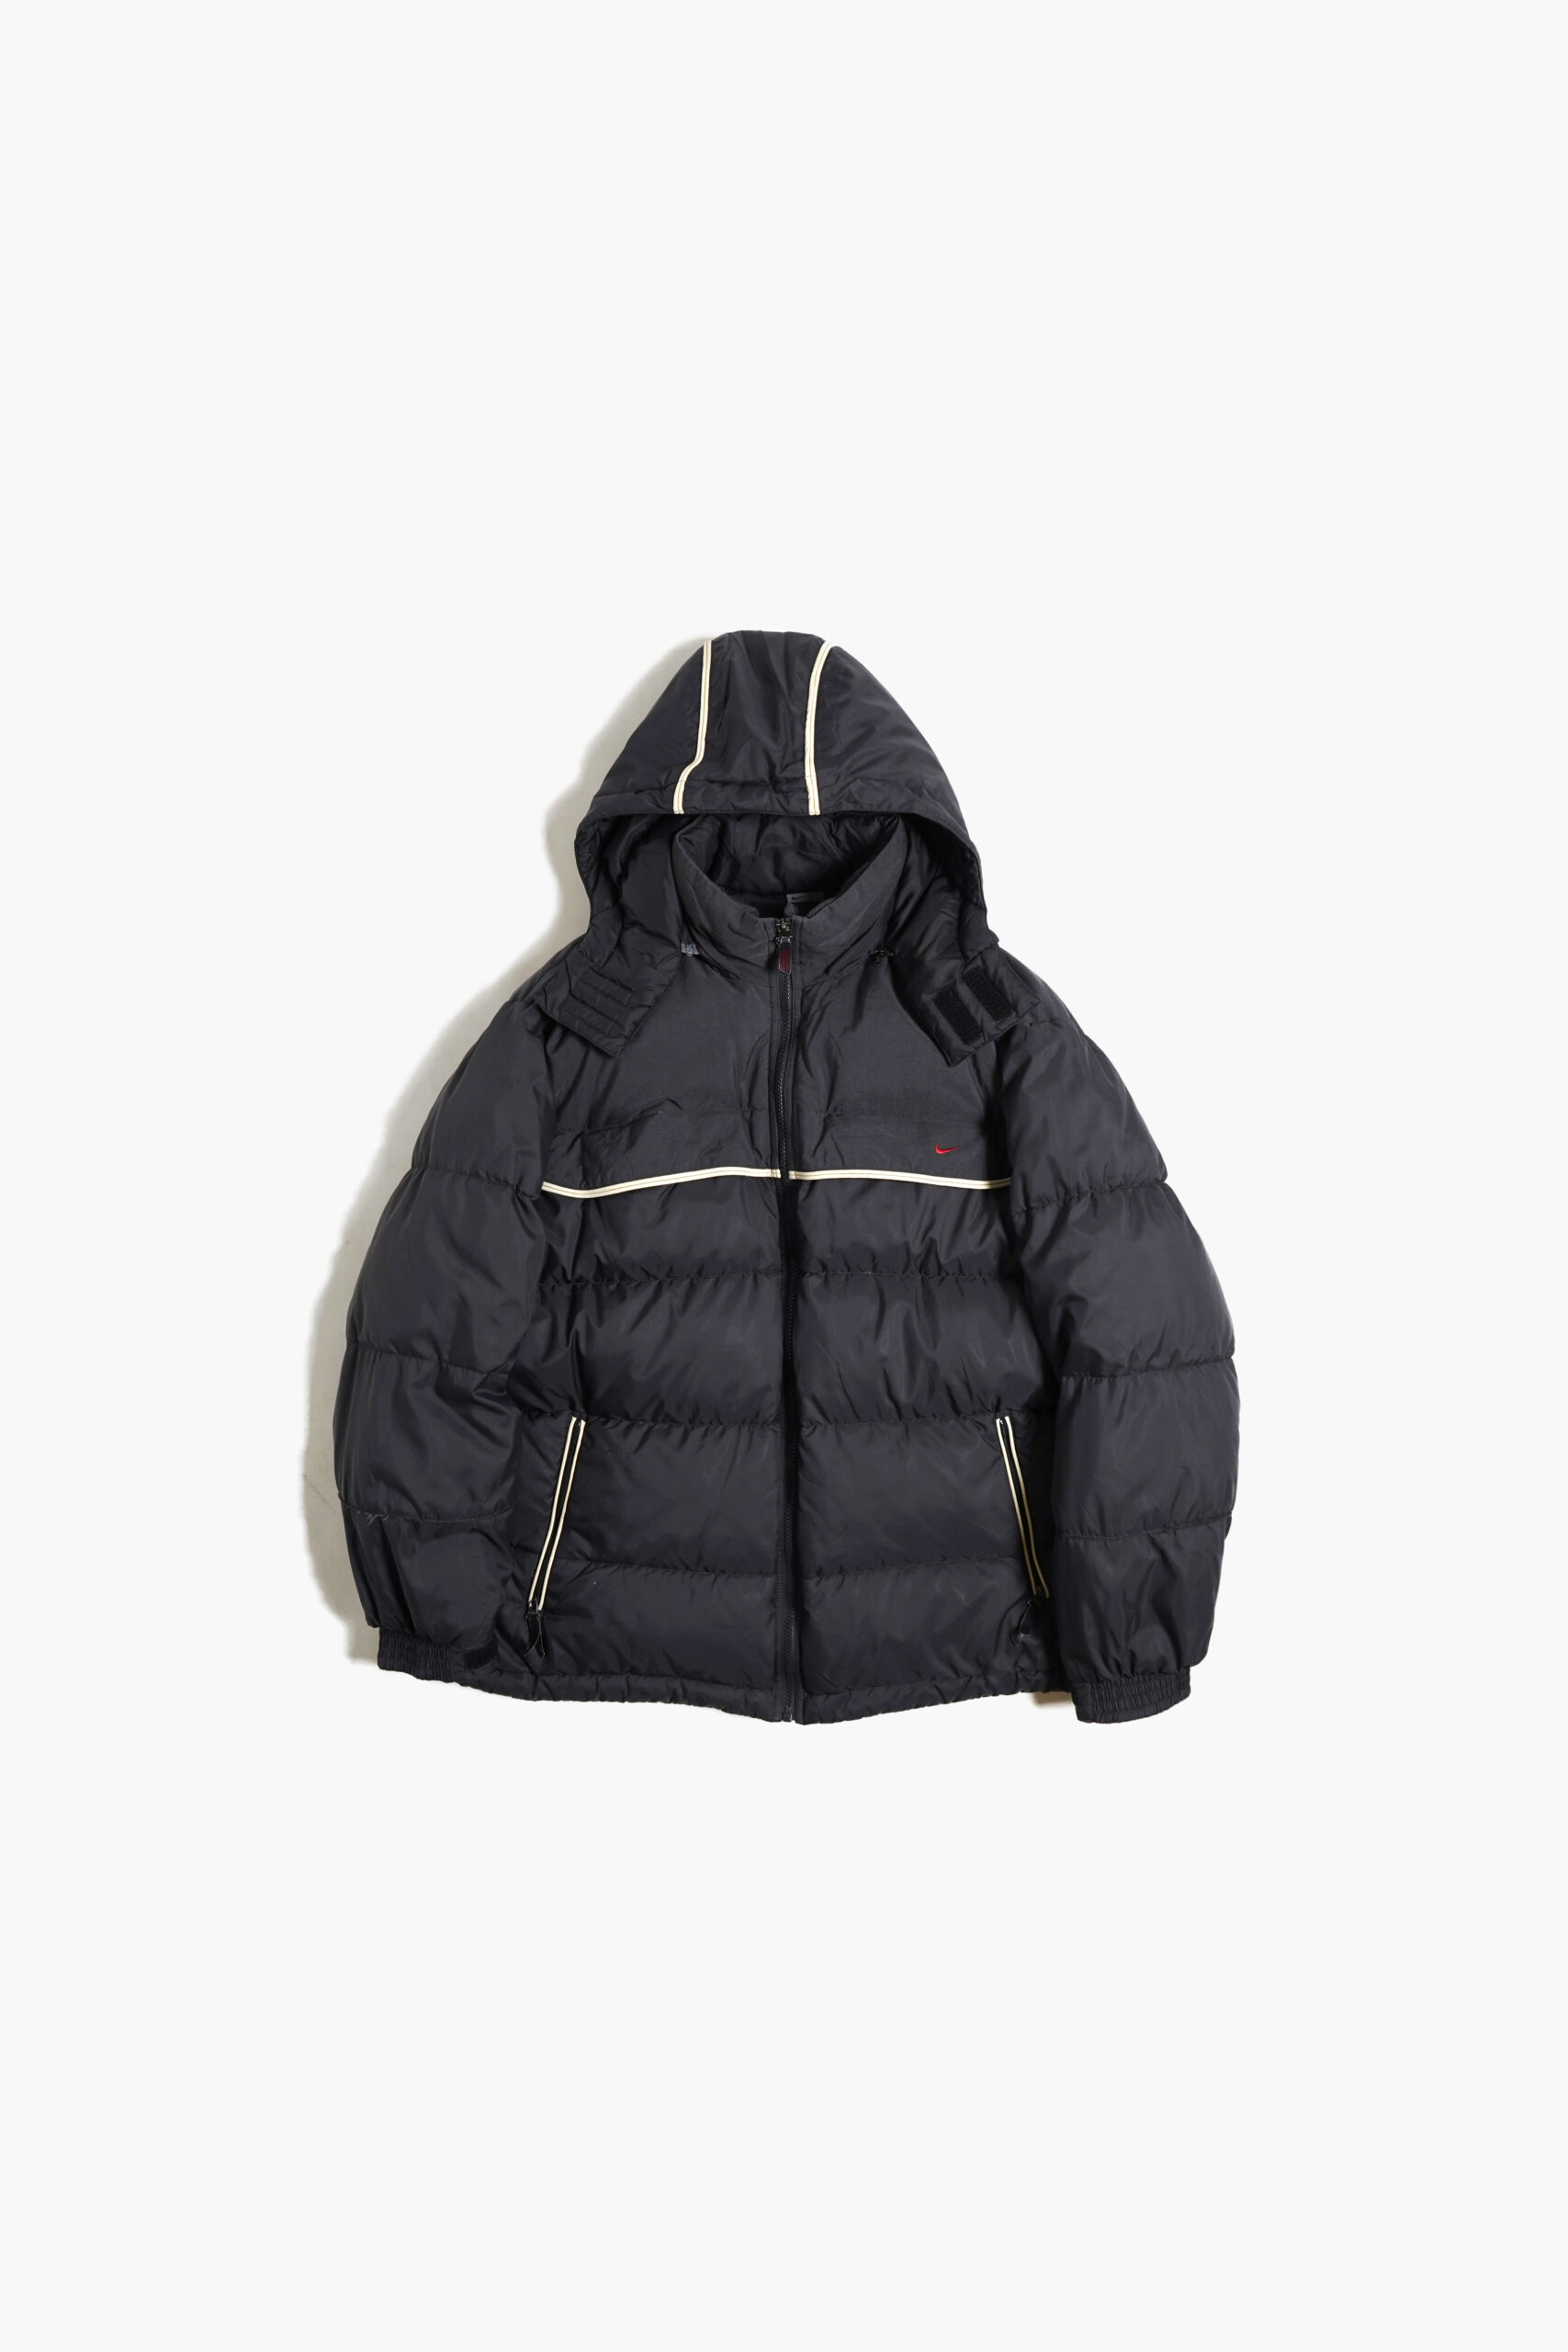 NIKE EARLY 00'S DESIGN DOWN JACKET